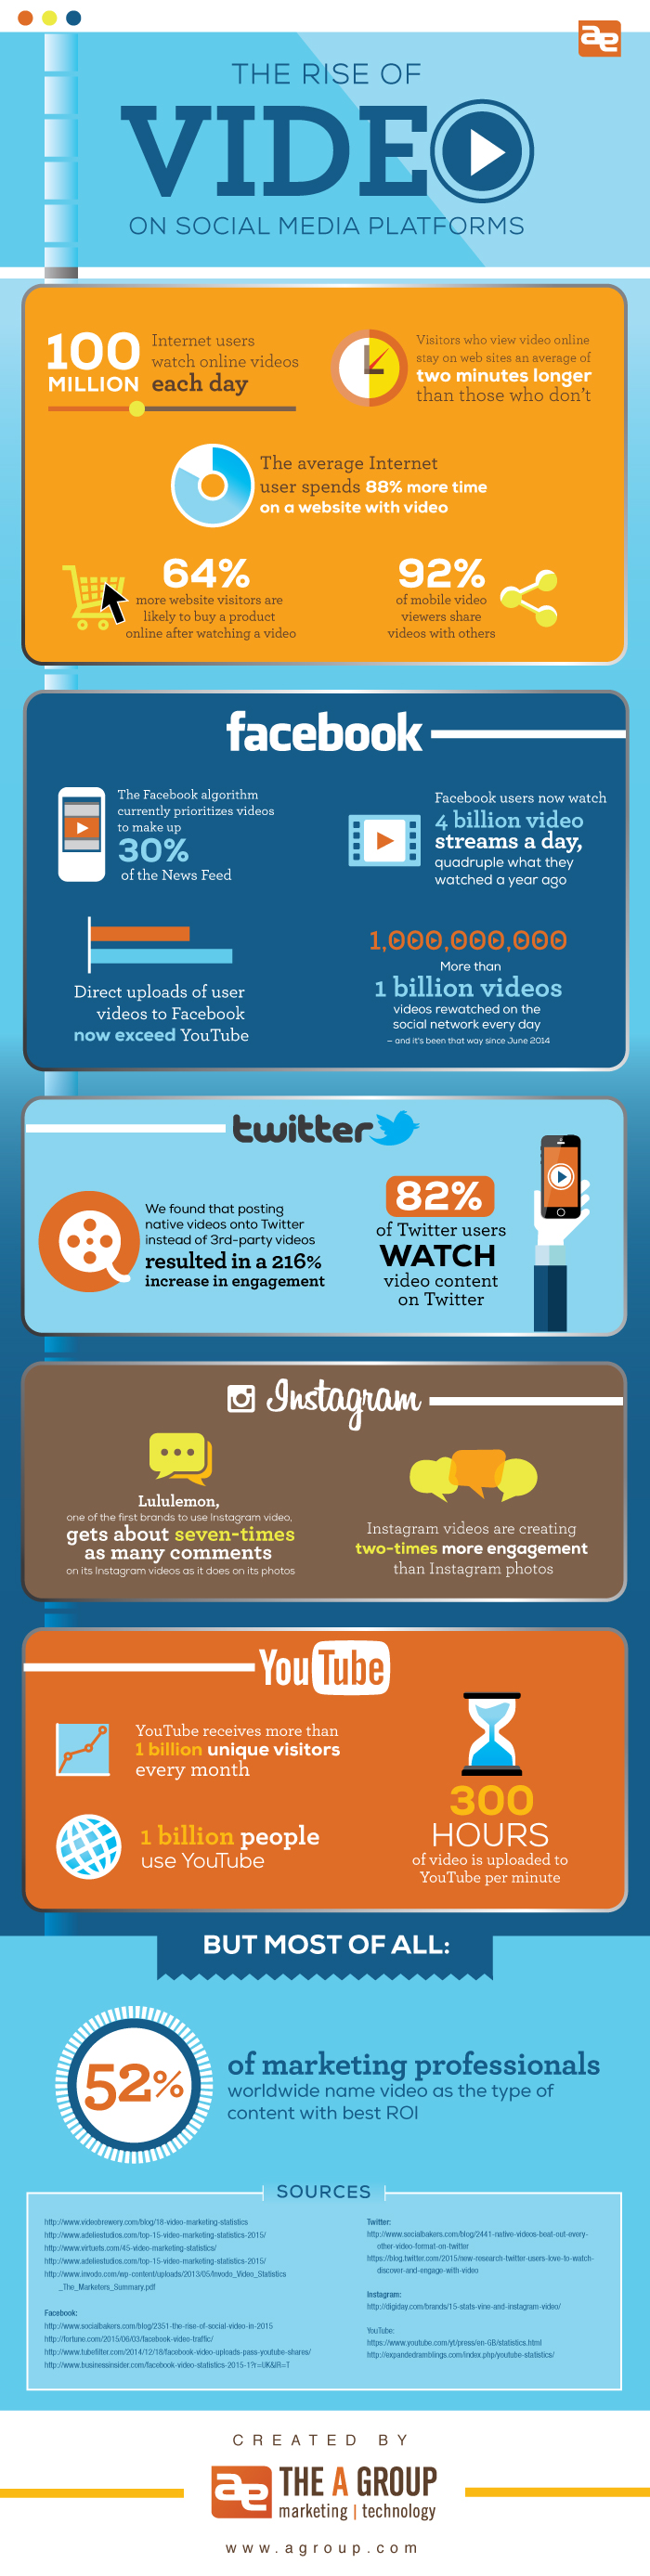 The rise of video on social media